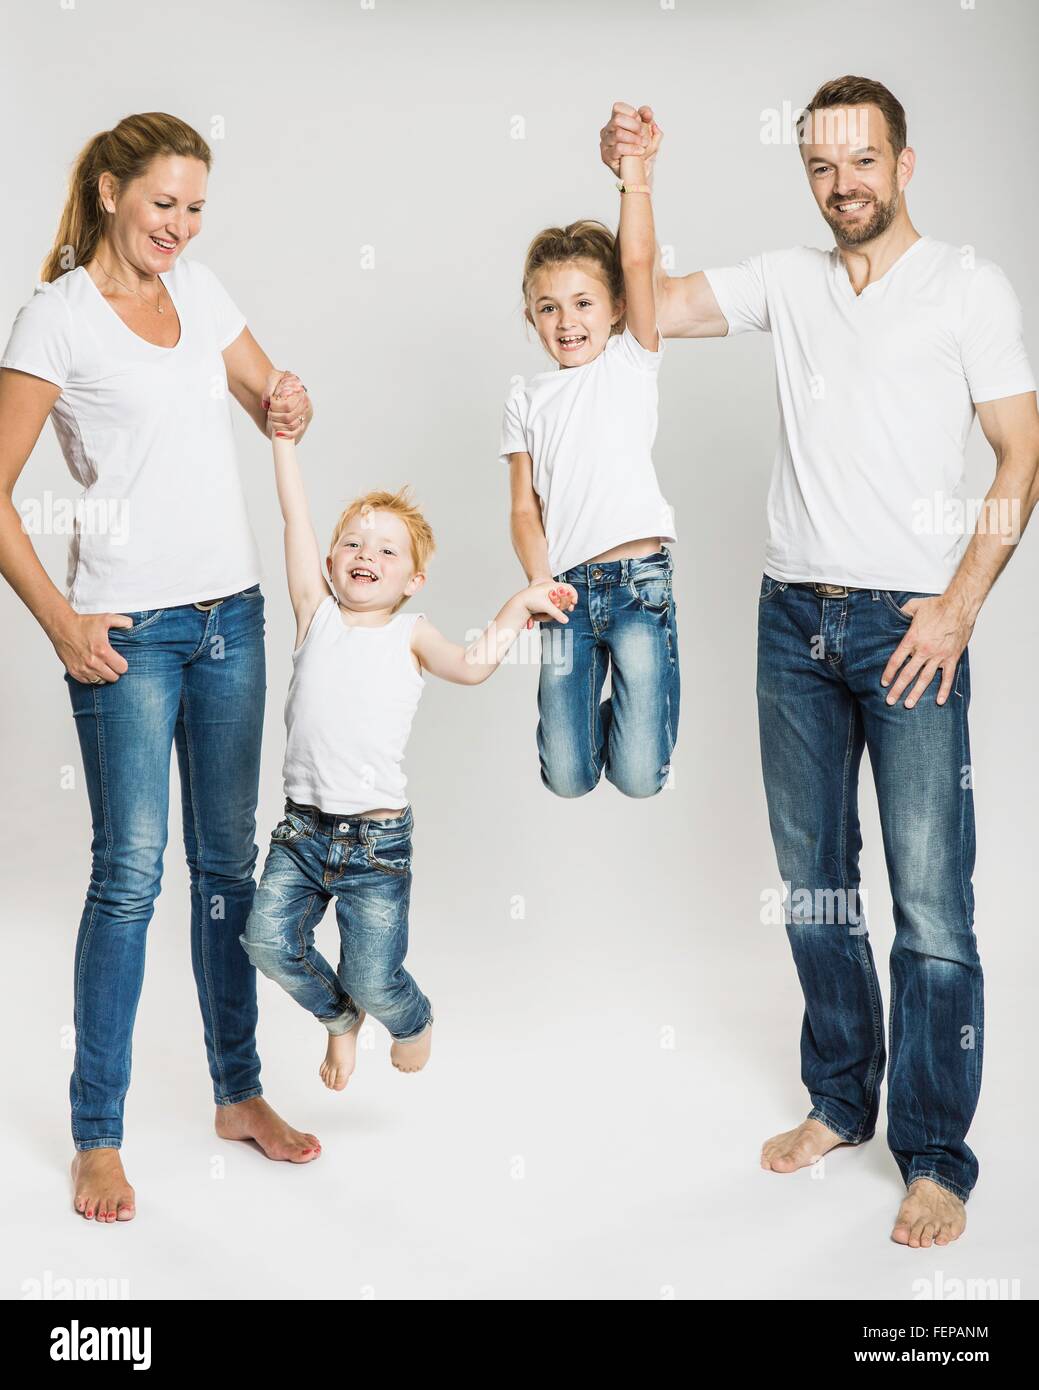 Studio portrait of mature parents lifting up son and daughter by the hands Stock Photo